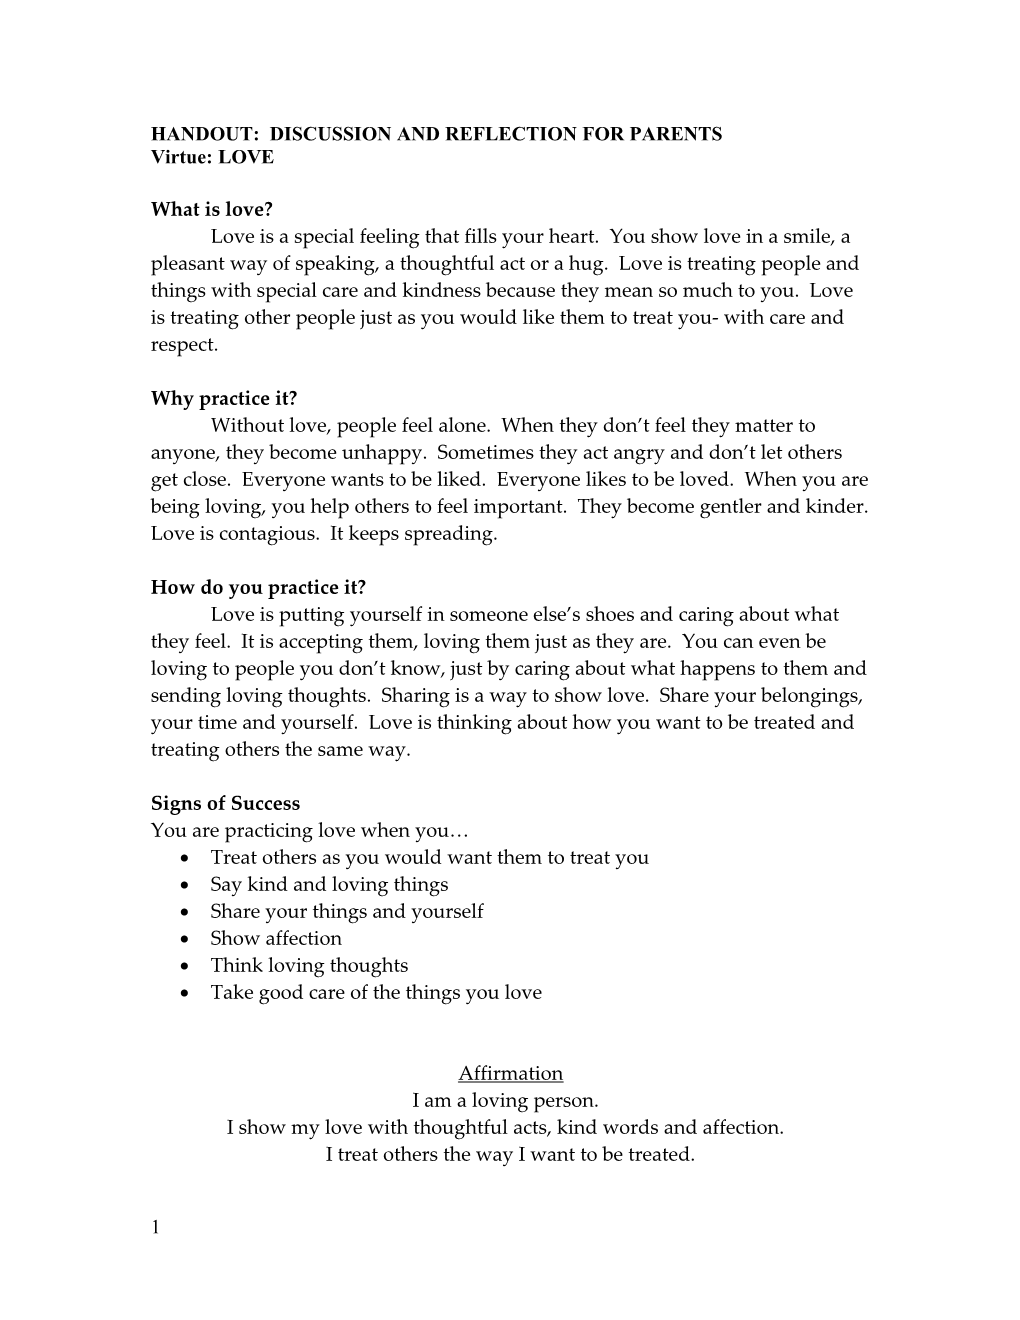 Handout: Discussion and Reflection for Parents